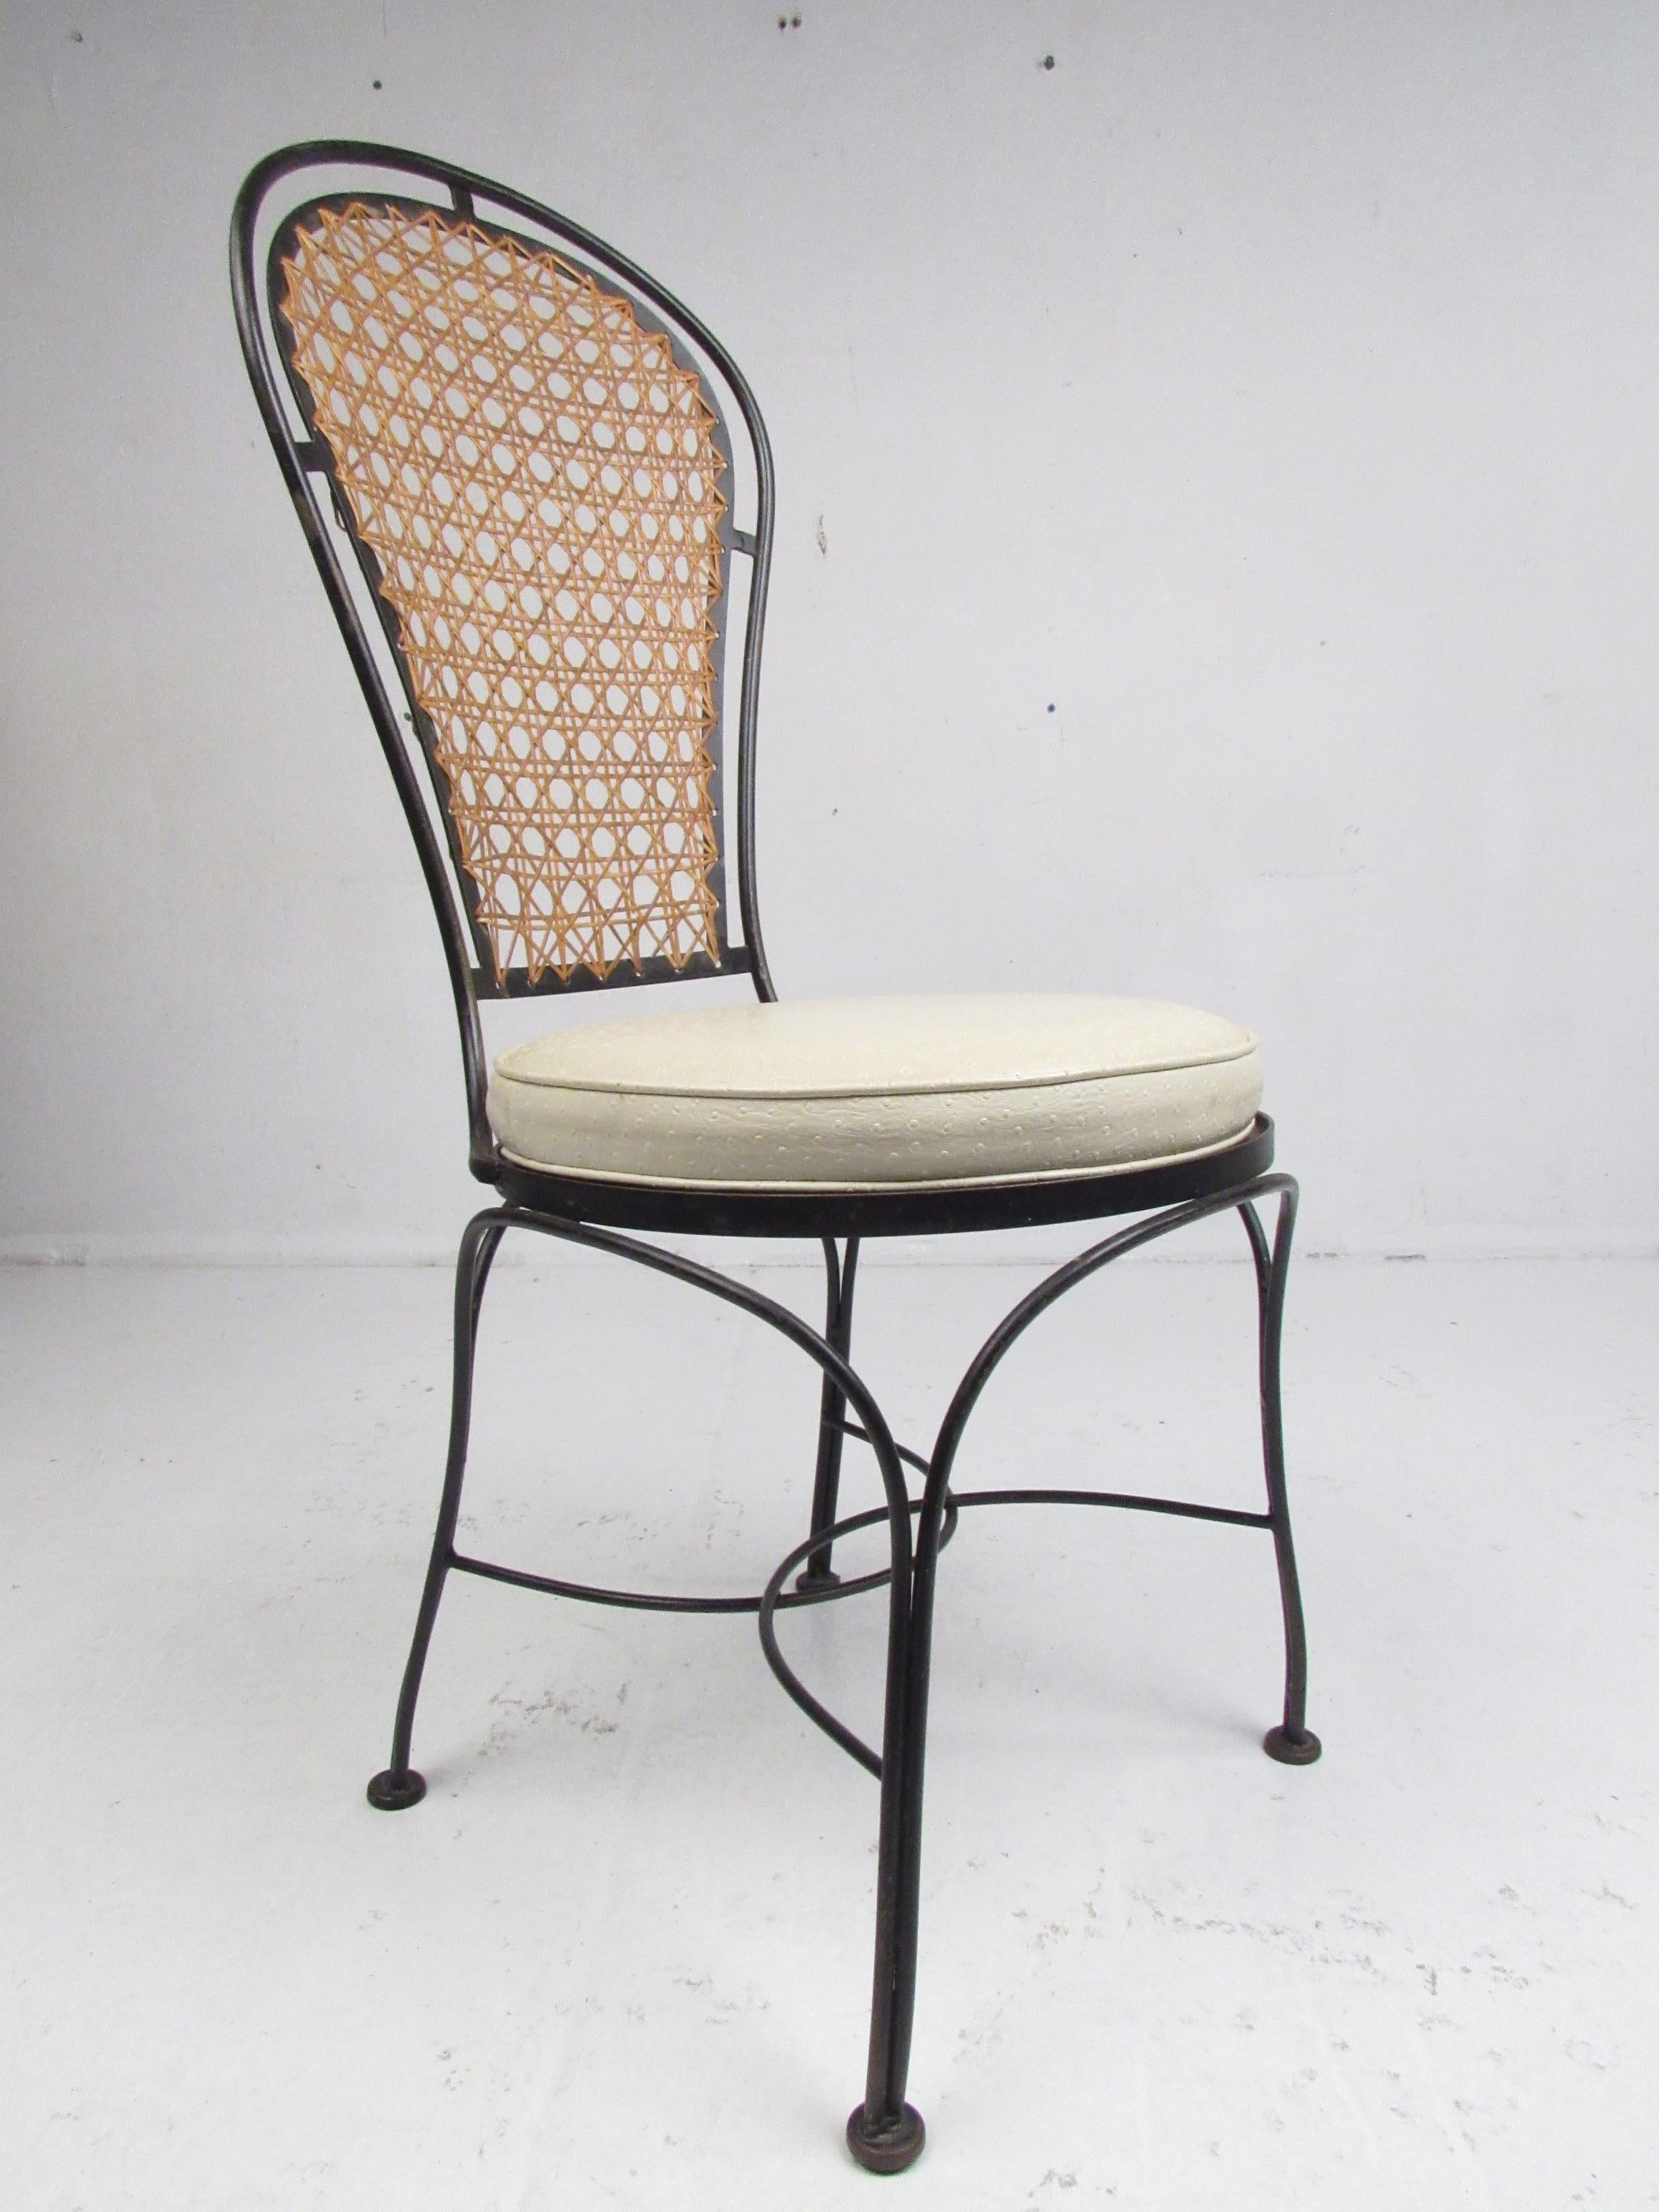 This stunning set of four vintage modern dining chairs boast sculptural wrought iron frames with thick padded seats and a woven cane back rest. A sleek and comfortable design that looks great on the patio or in the dining room. The bent rod iron